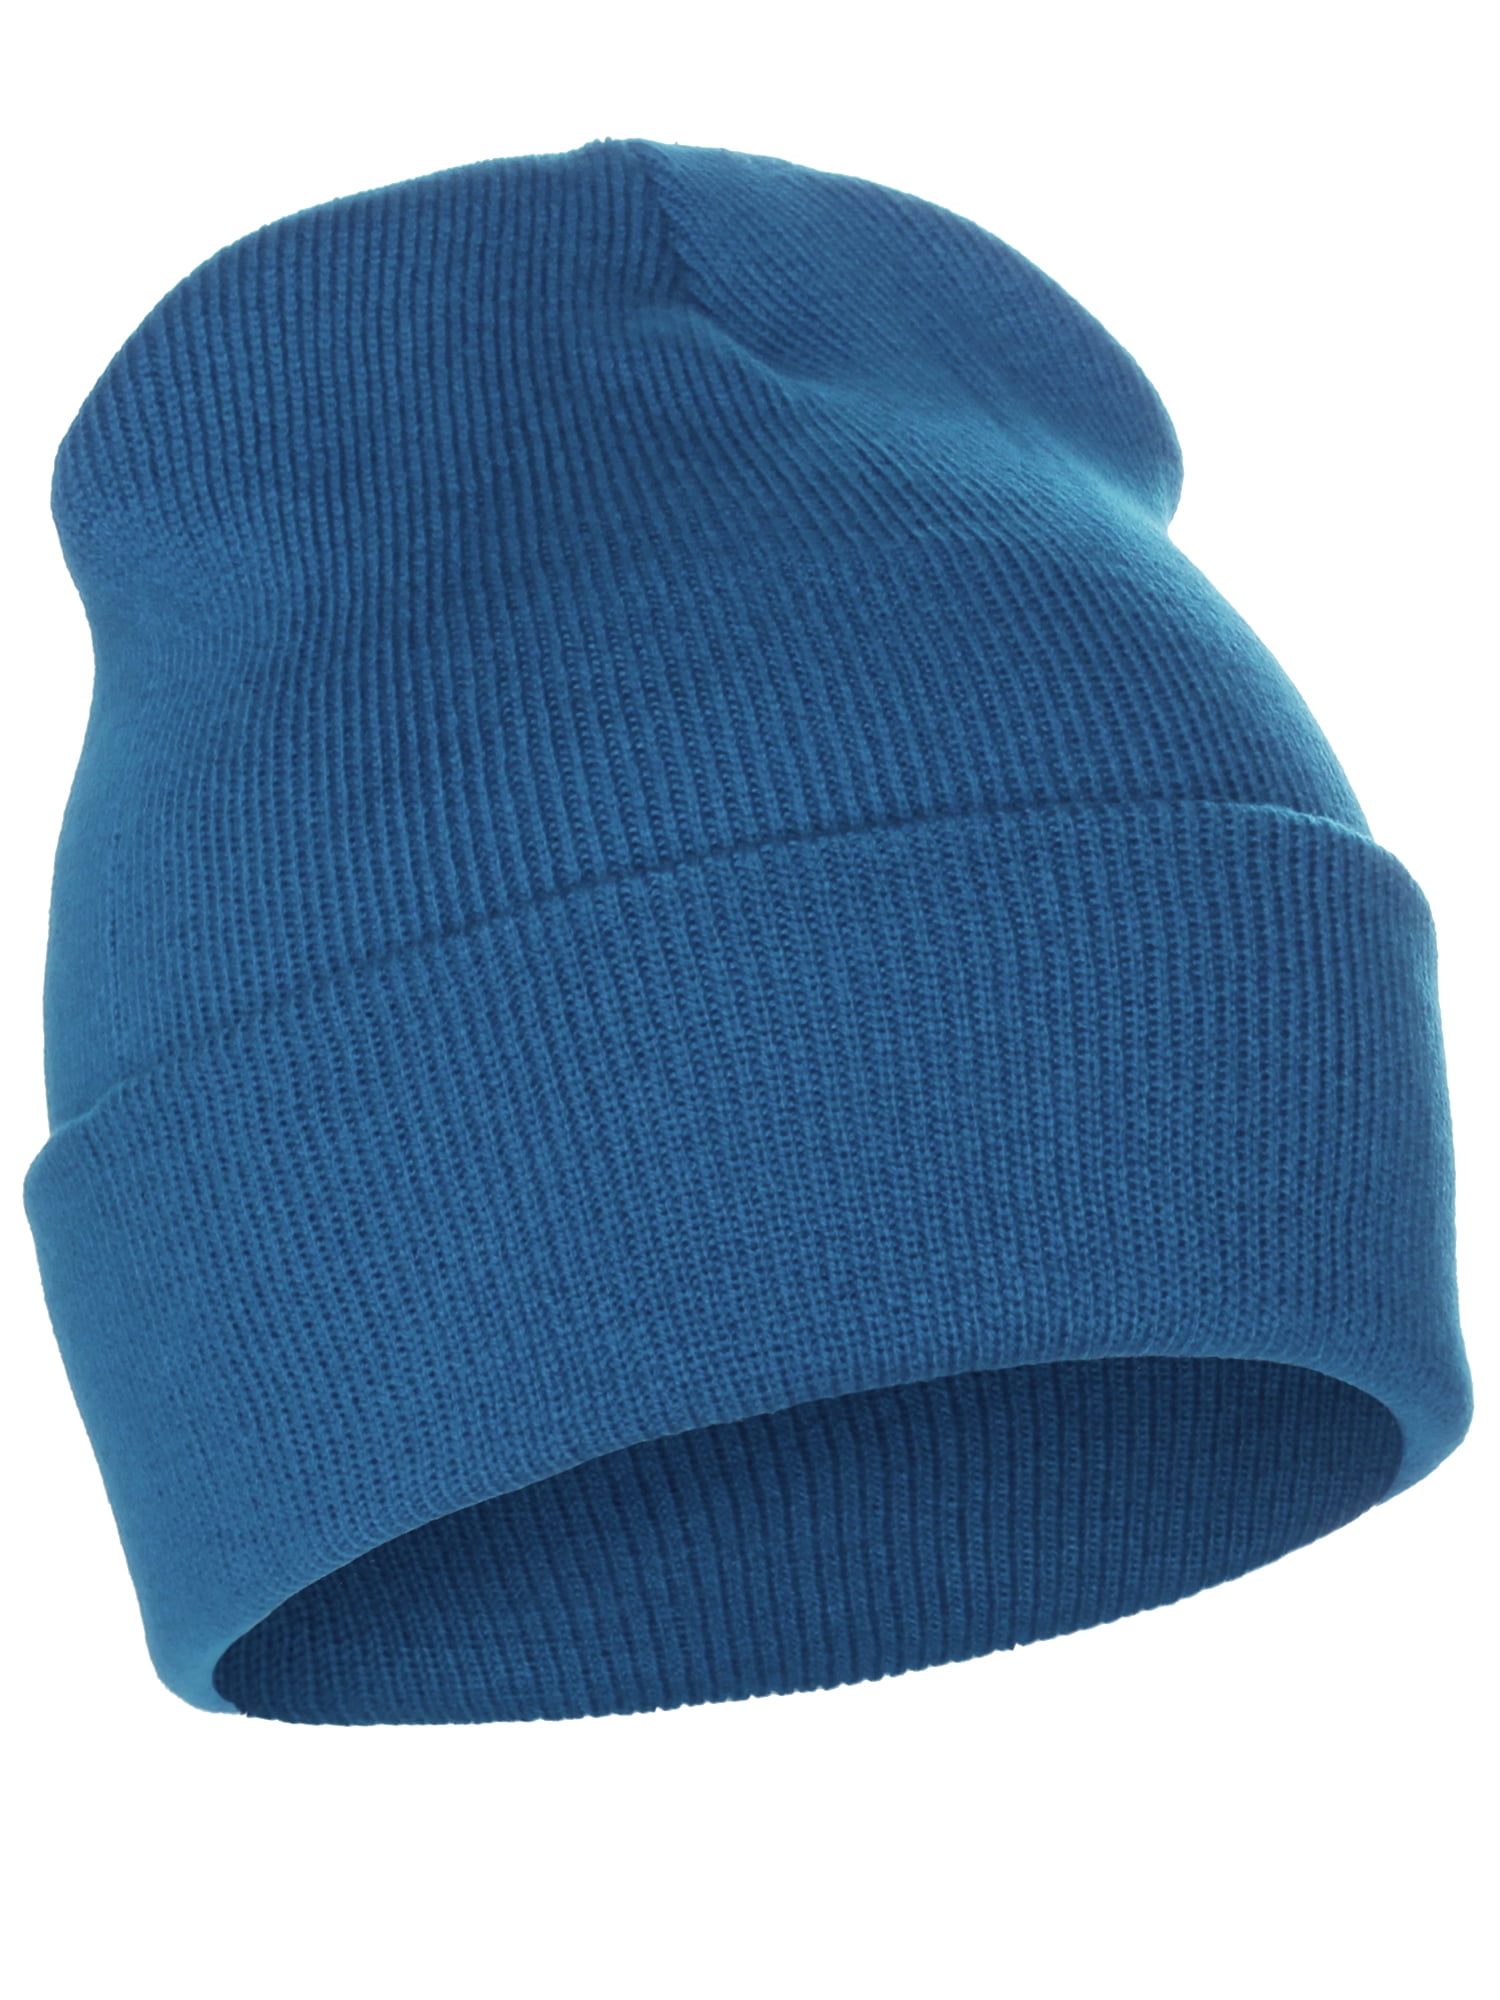 Turquoise Plain Classic Beanie Cap, Hat Winter Cuffed Knit Skully